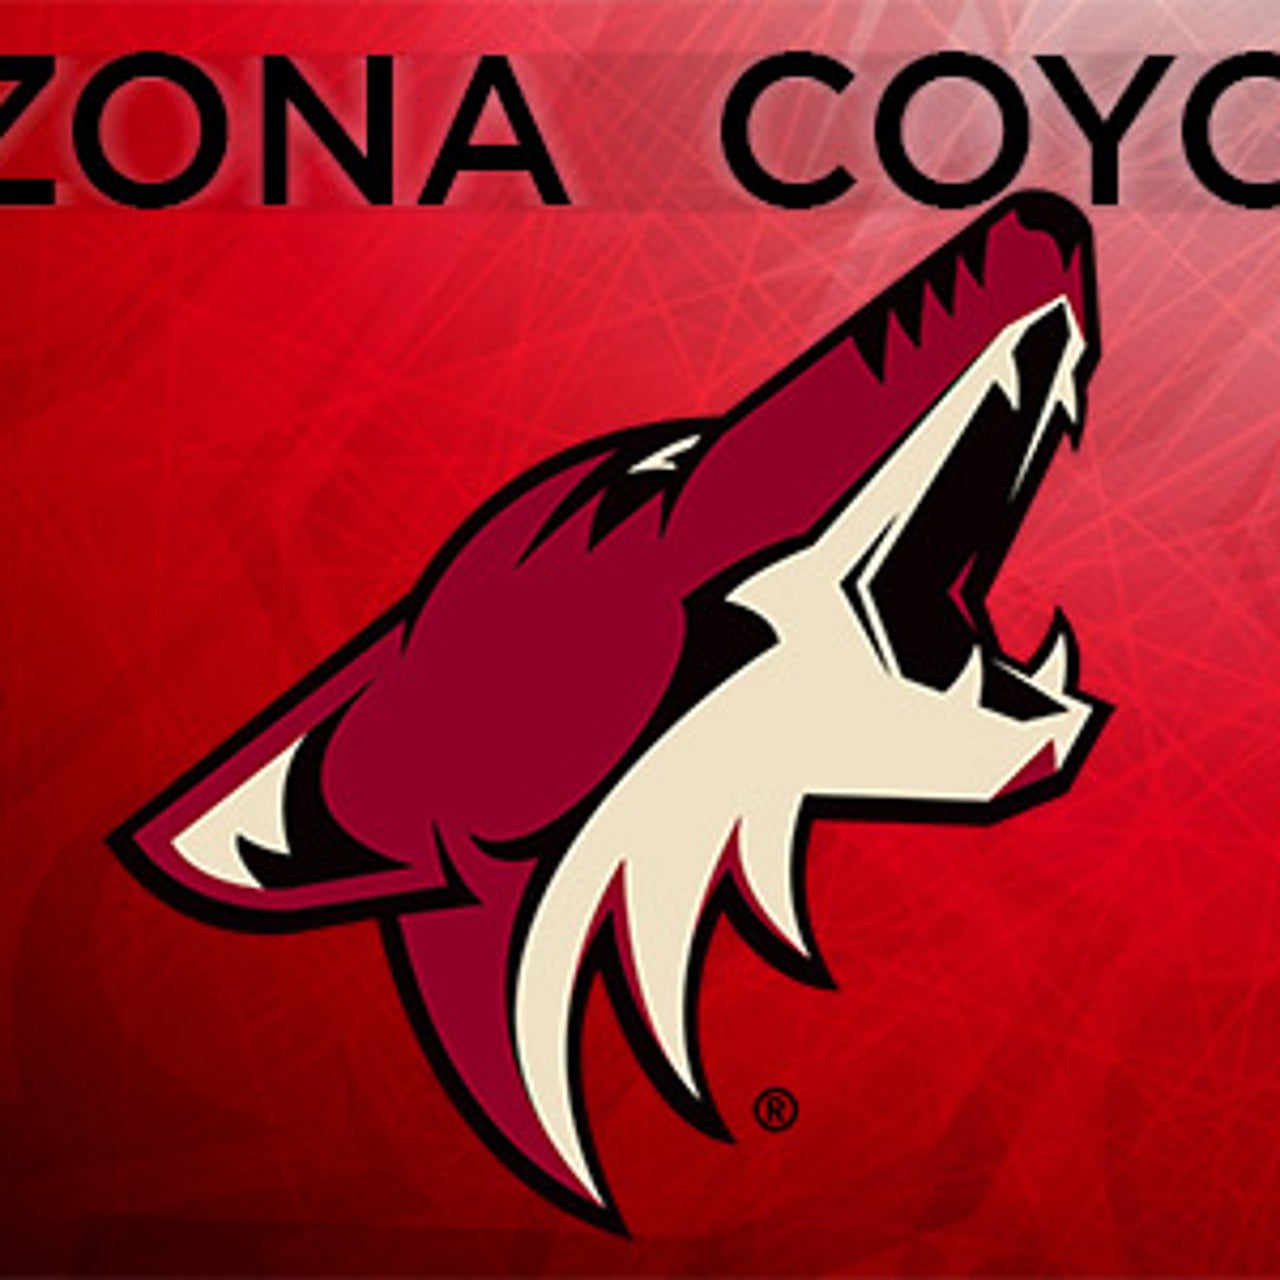 Arizona Coyotes announce return of classic jersey and logo